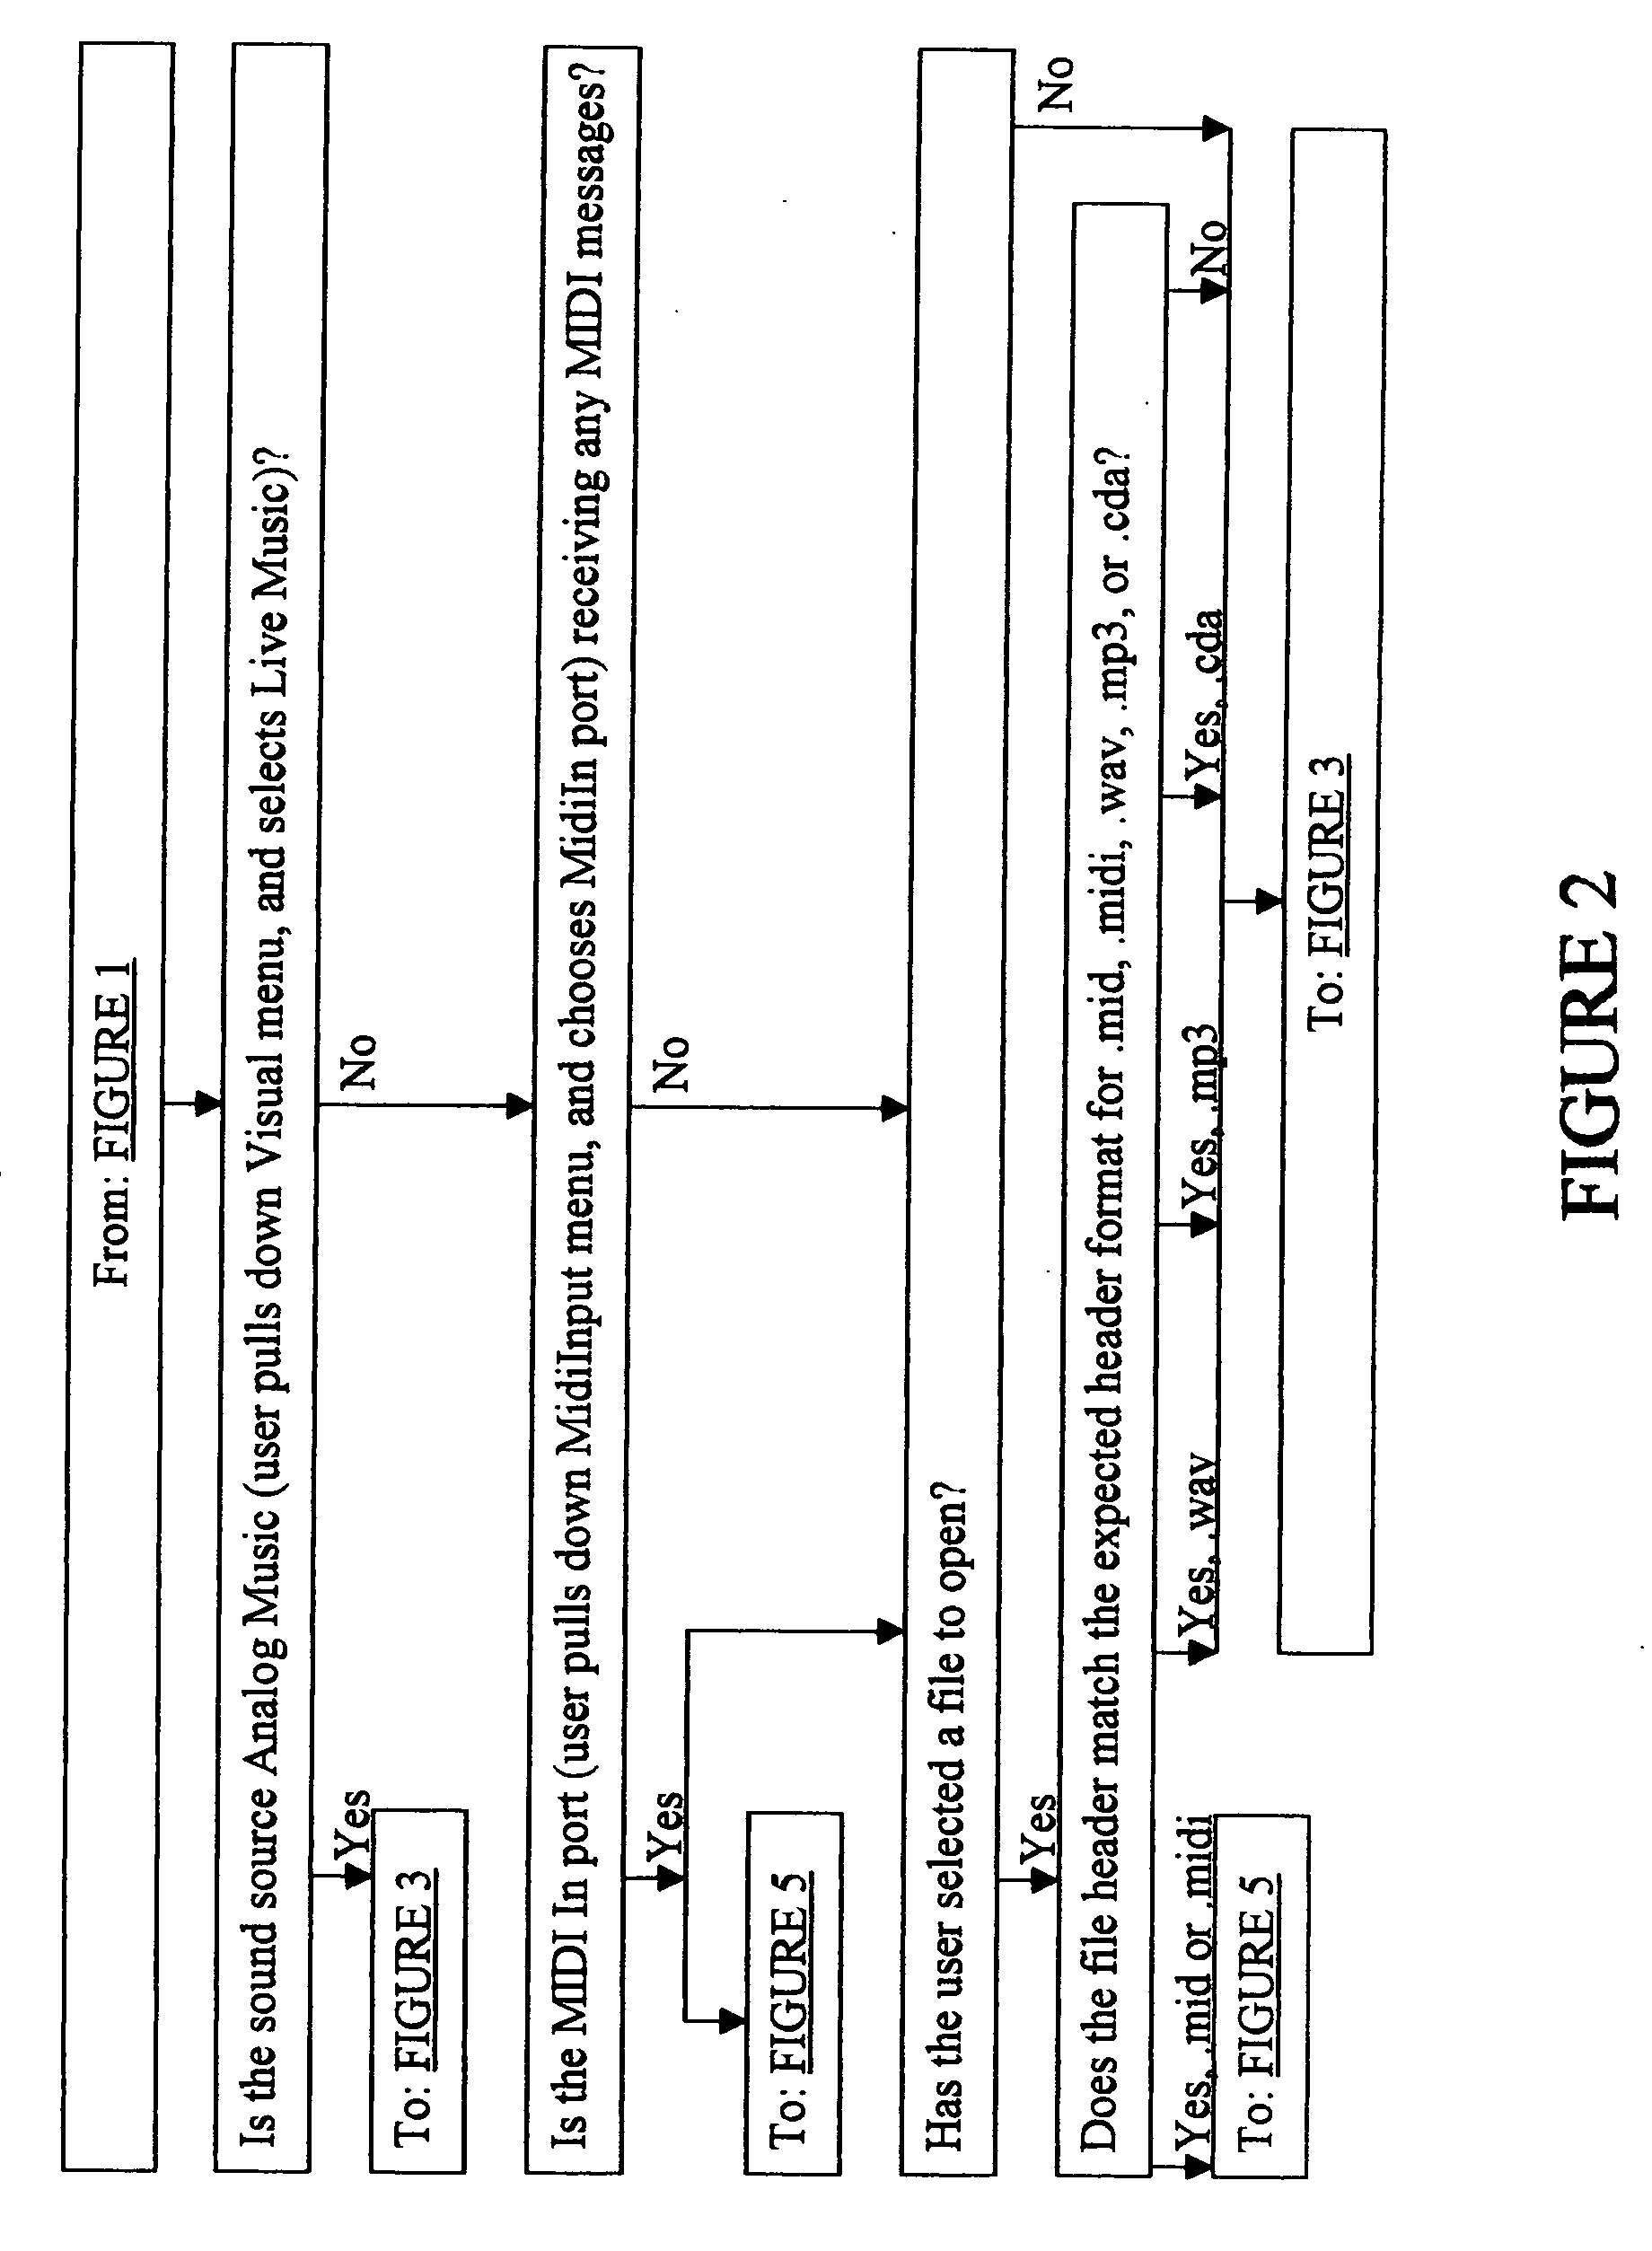 Apparatus and method for identifying and simultaneously displaying images of musical notes in music and producing the music